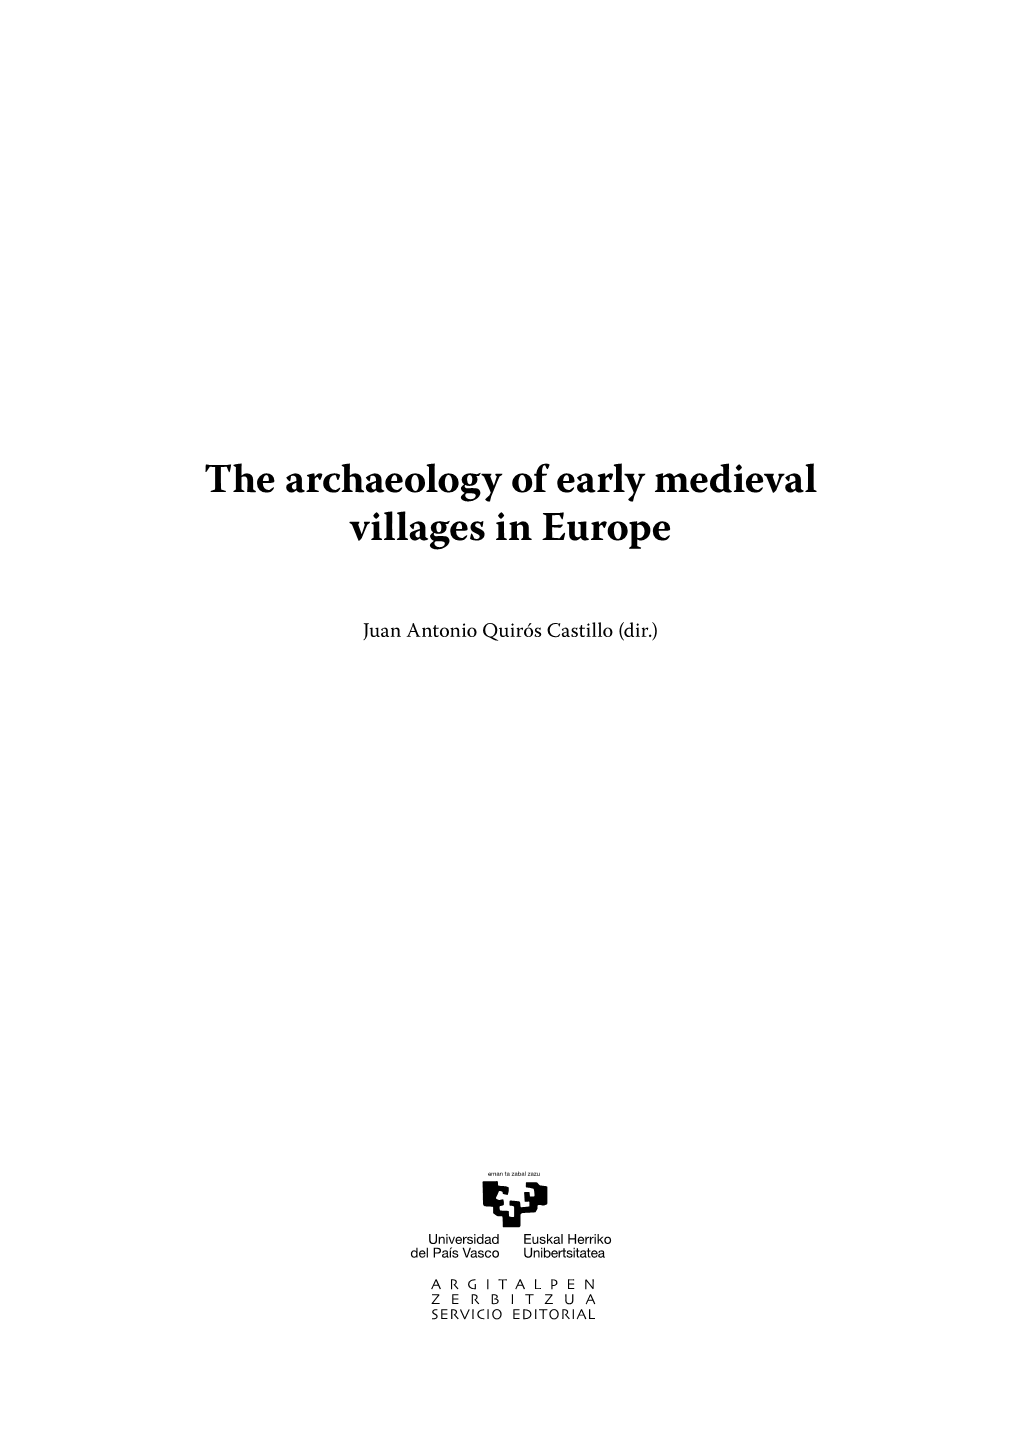 The Archaeology of Early Medieval Villages in Europe